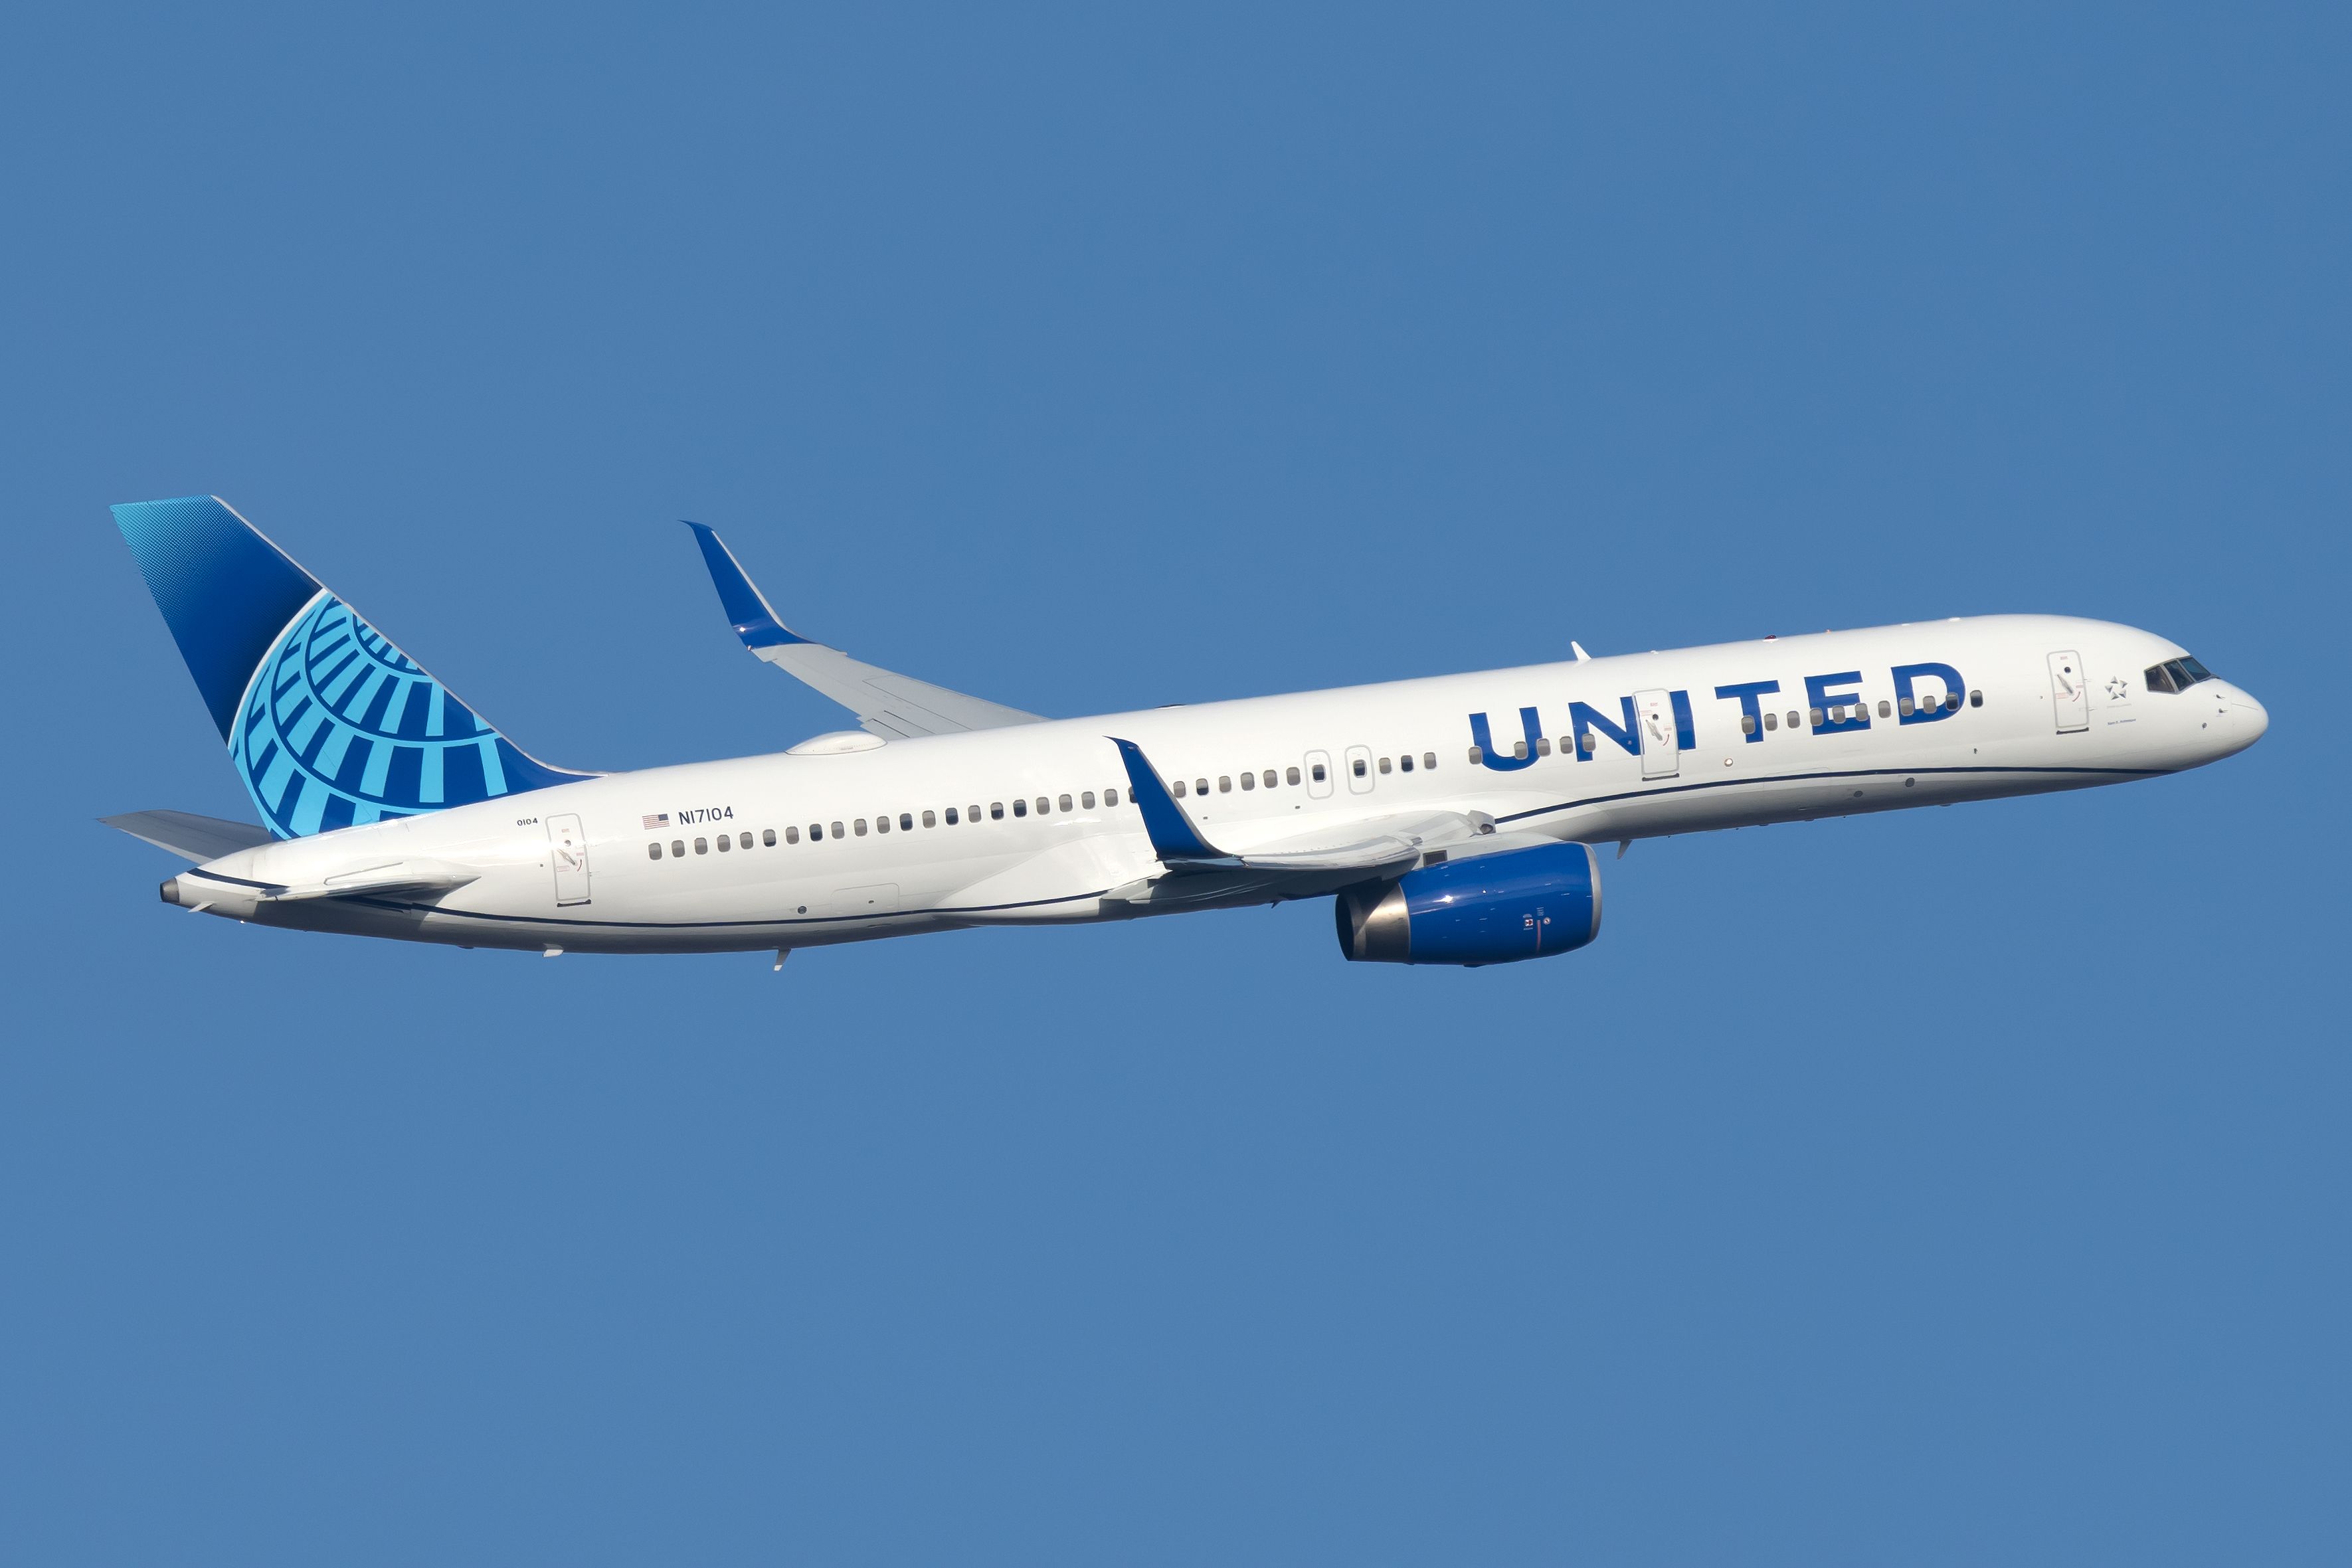 United Airlines Boeing 757 in the sky.